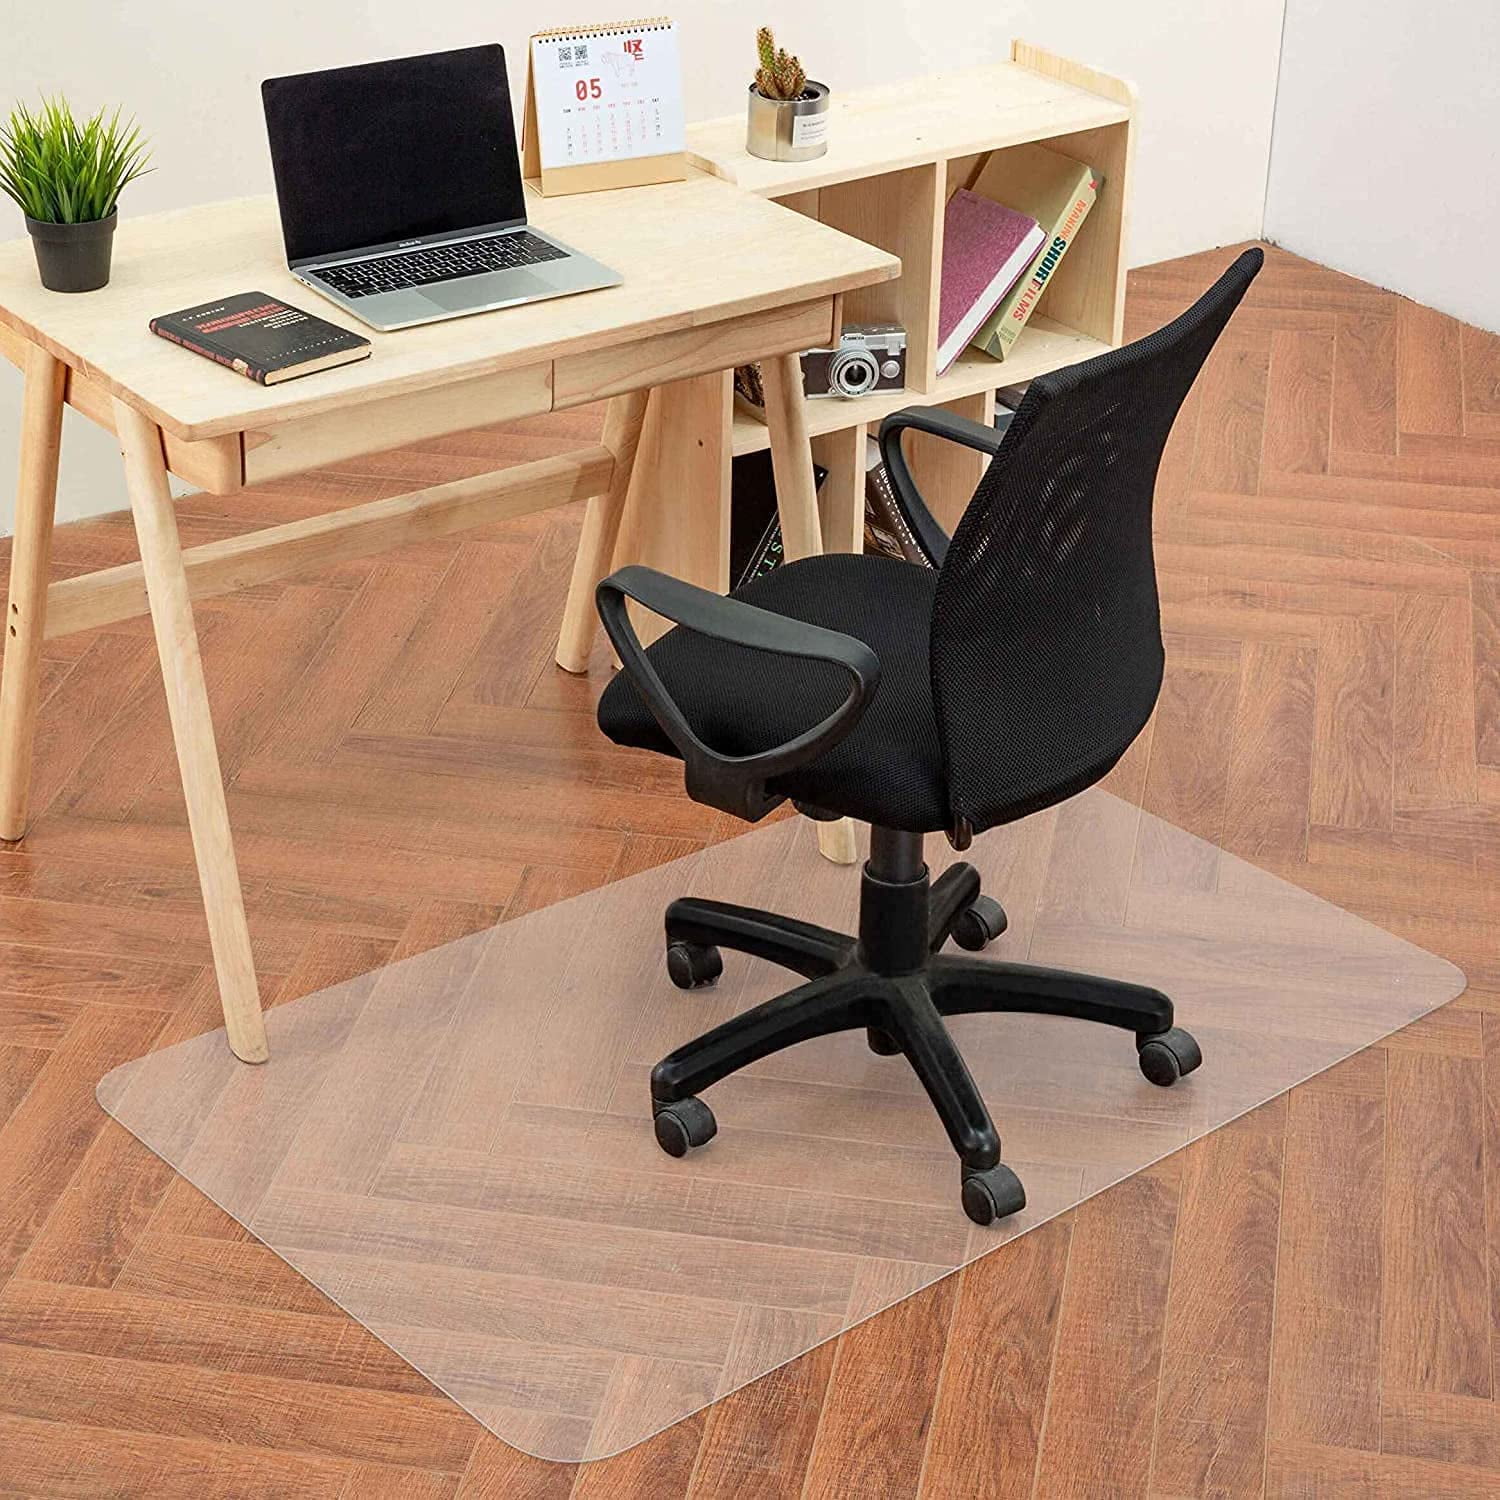 AGLZWY Office Chair Mat for Hardwood Floor，PVC Clear Desk Cover Plastic Table Pad Waterproof Non Slip Sound Absorbent Soft Glass Kitchen Tiles Rolling Wheelchair， Customizable 